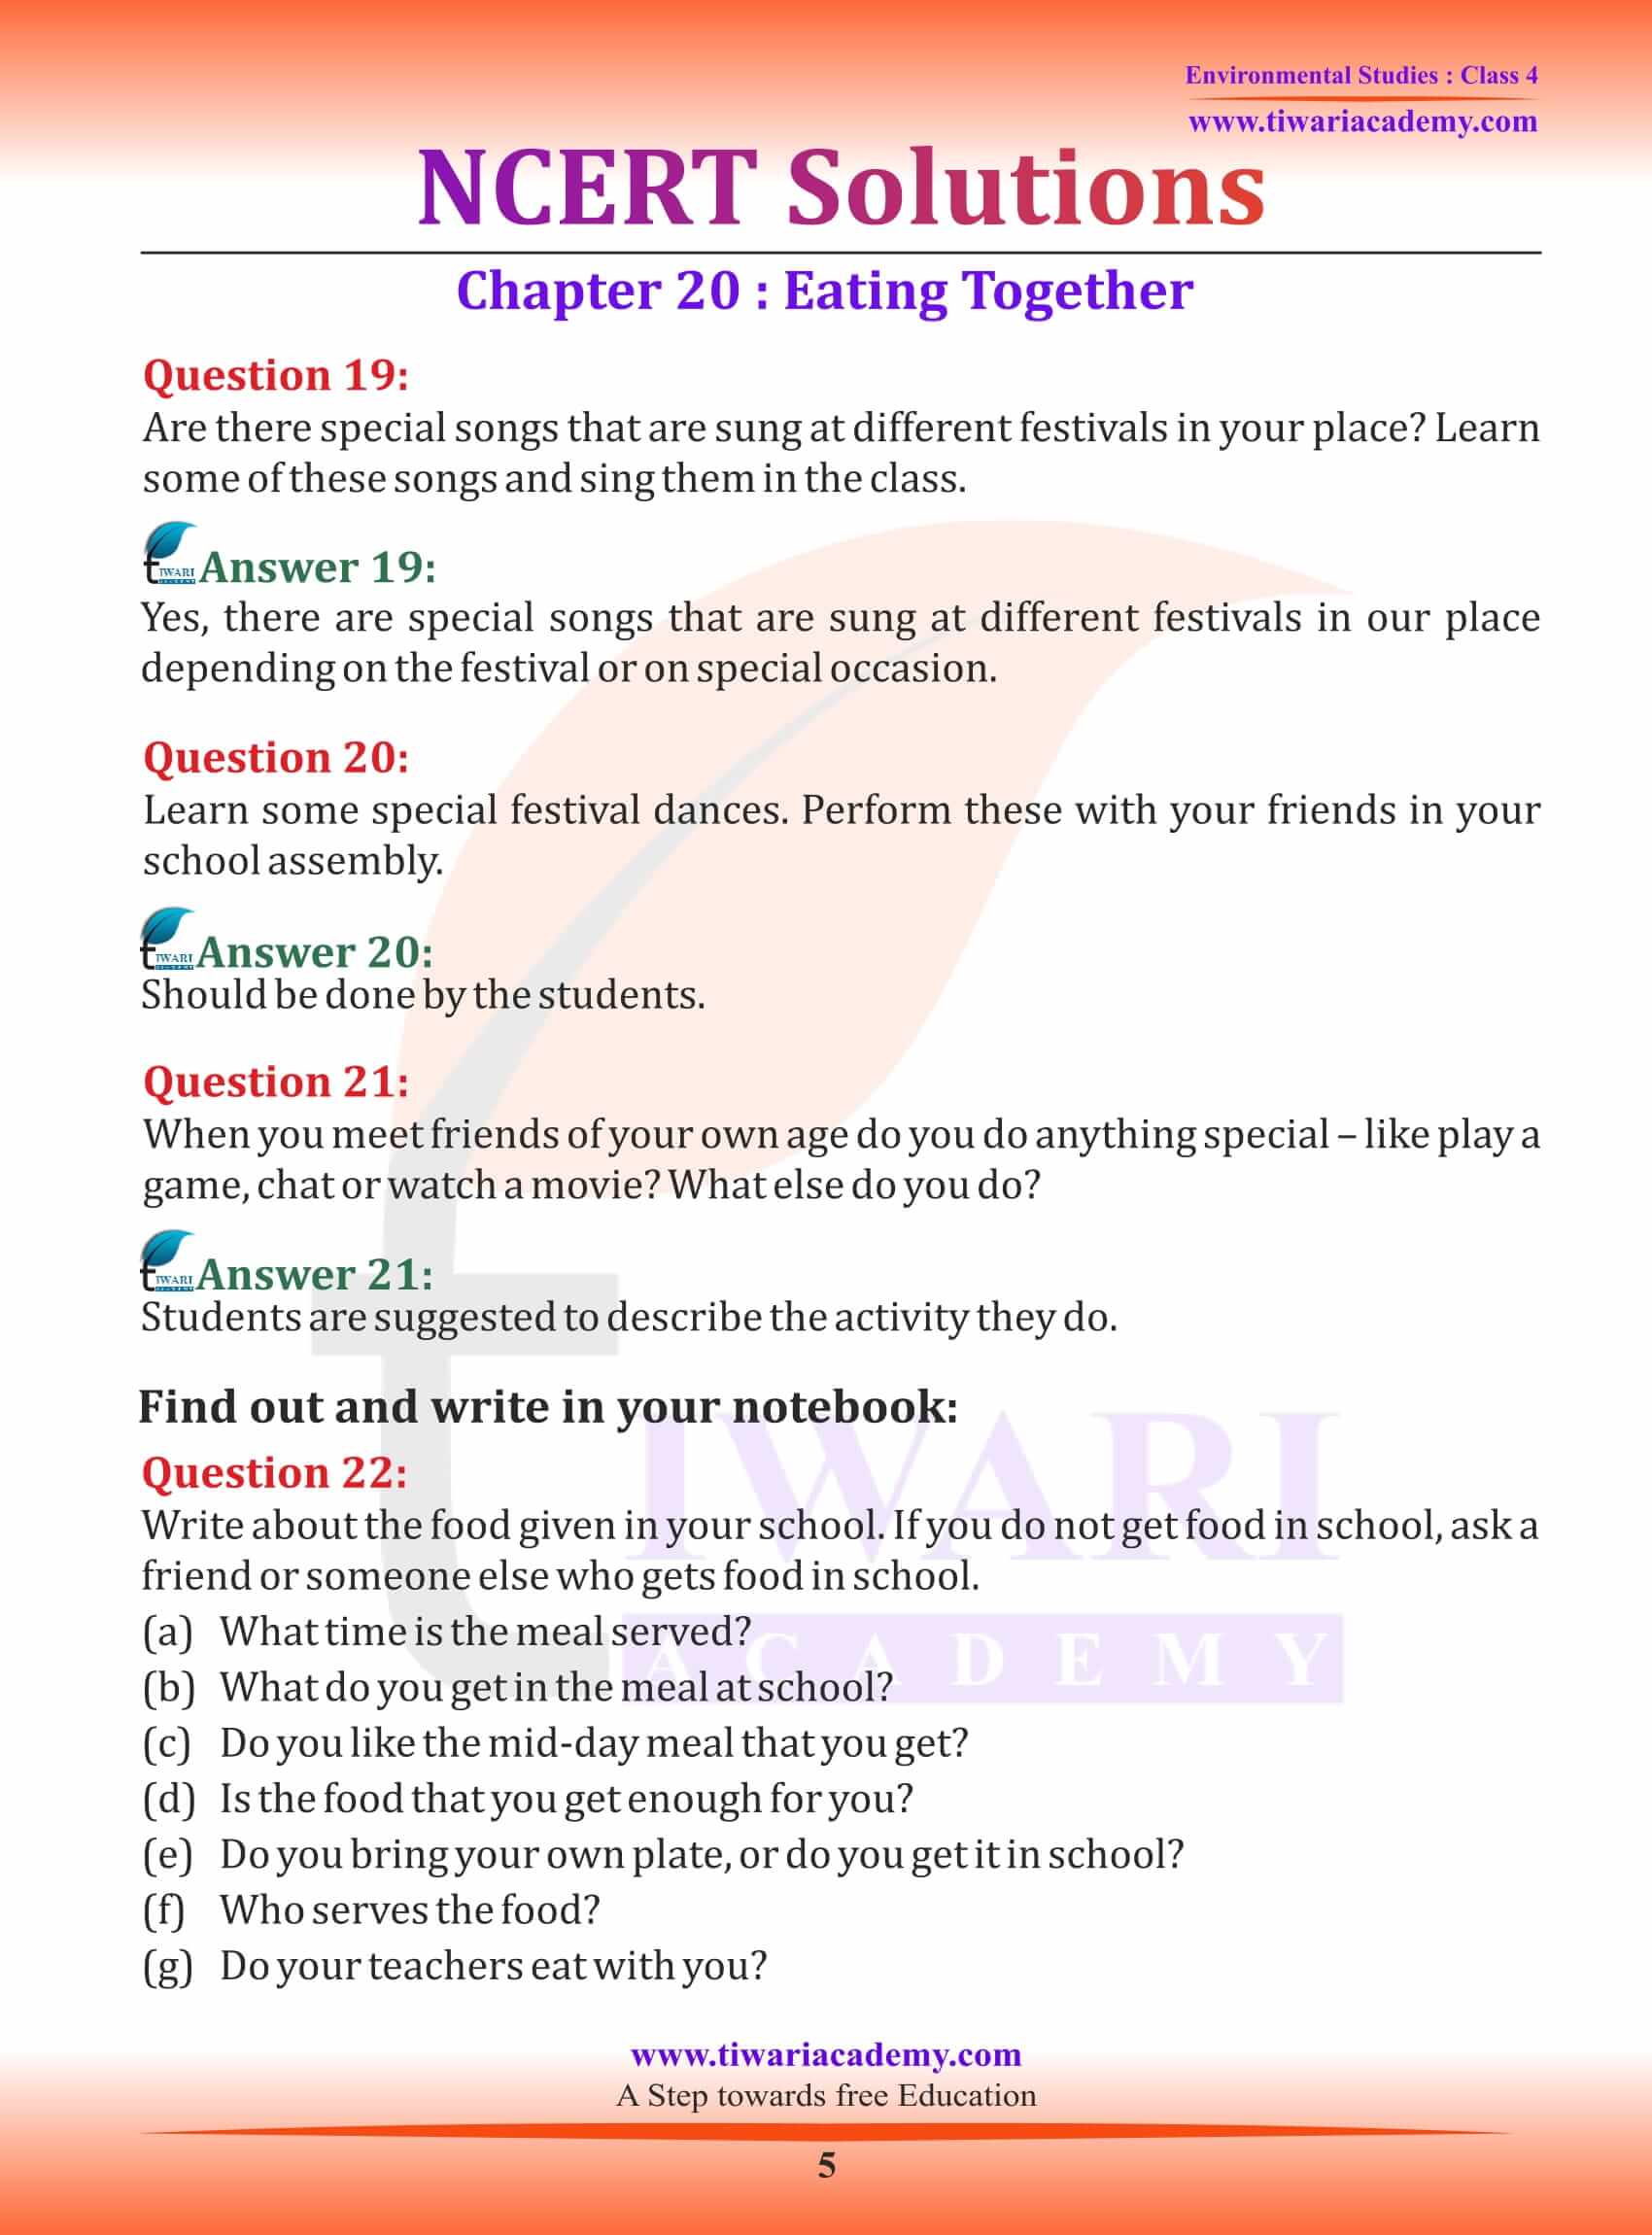 NCERT Solutions for Class 4 EVS Chapter 20 in English Medium